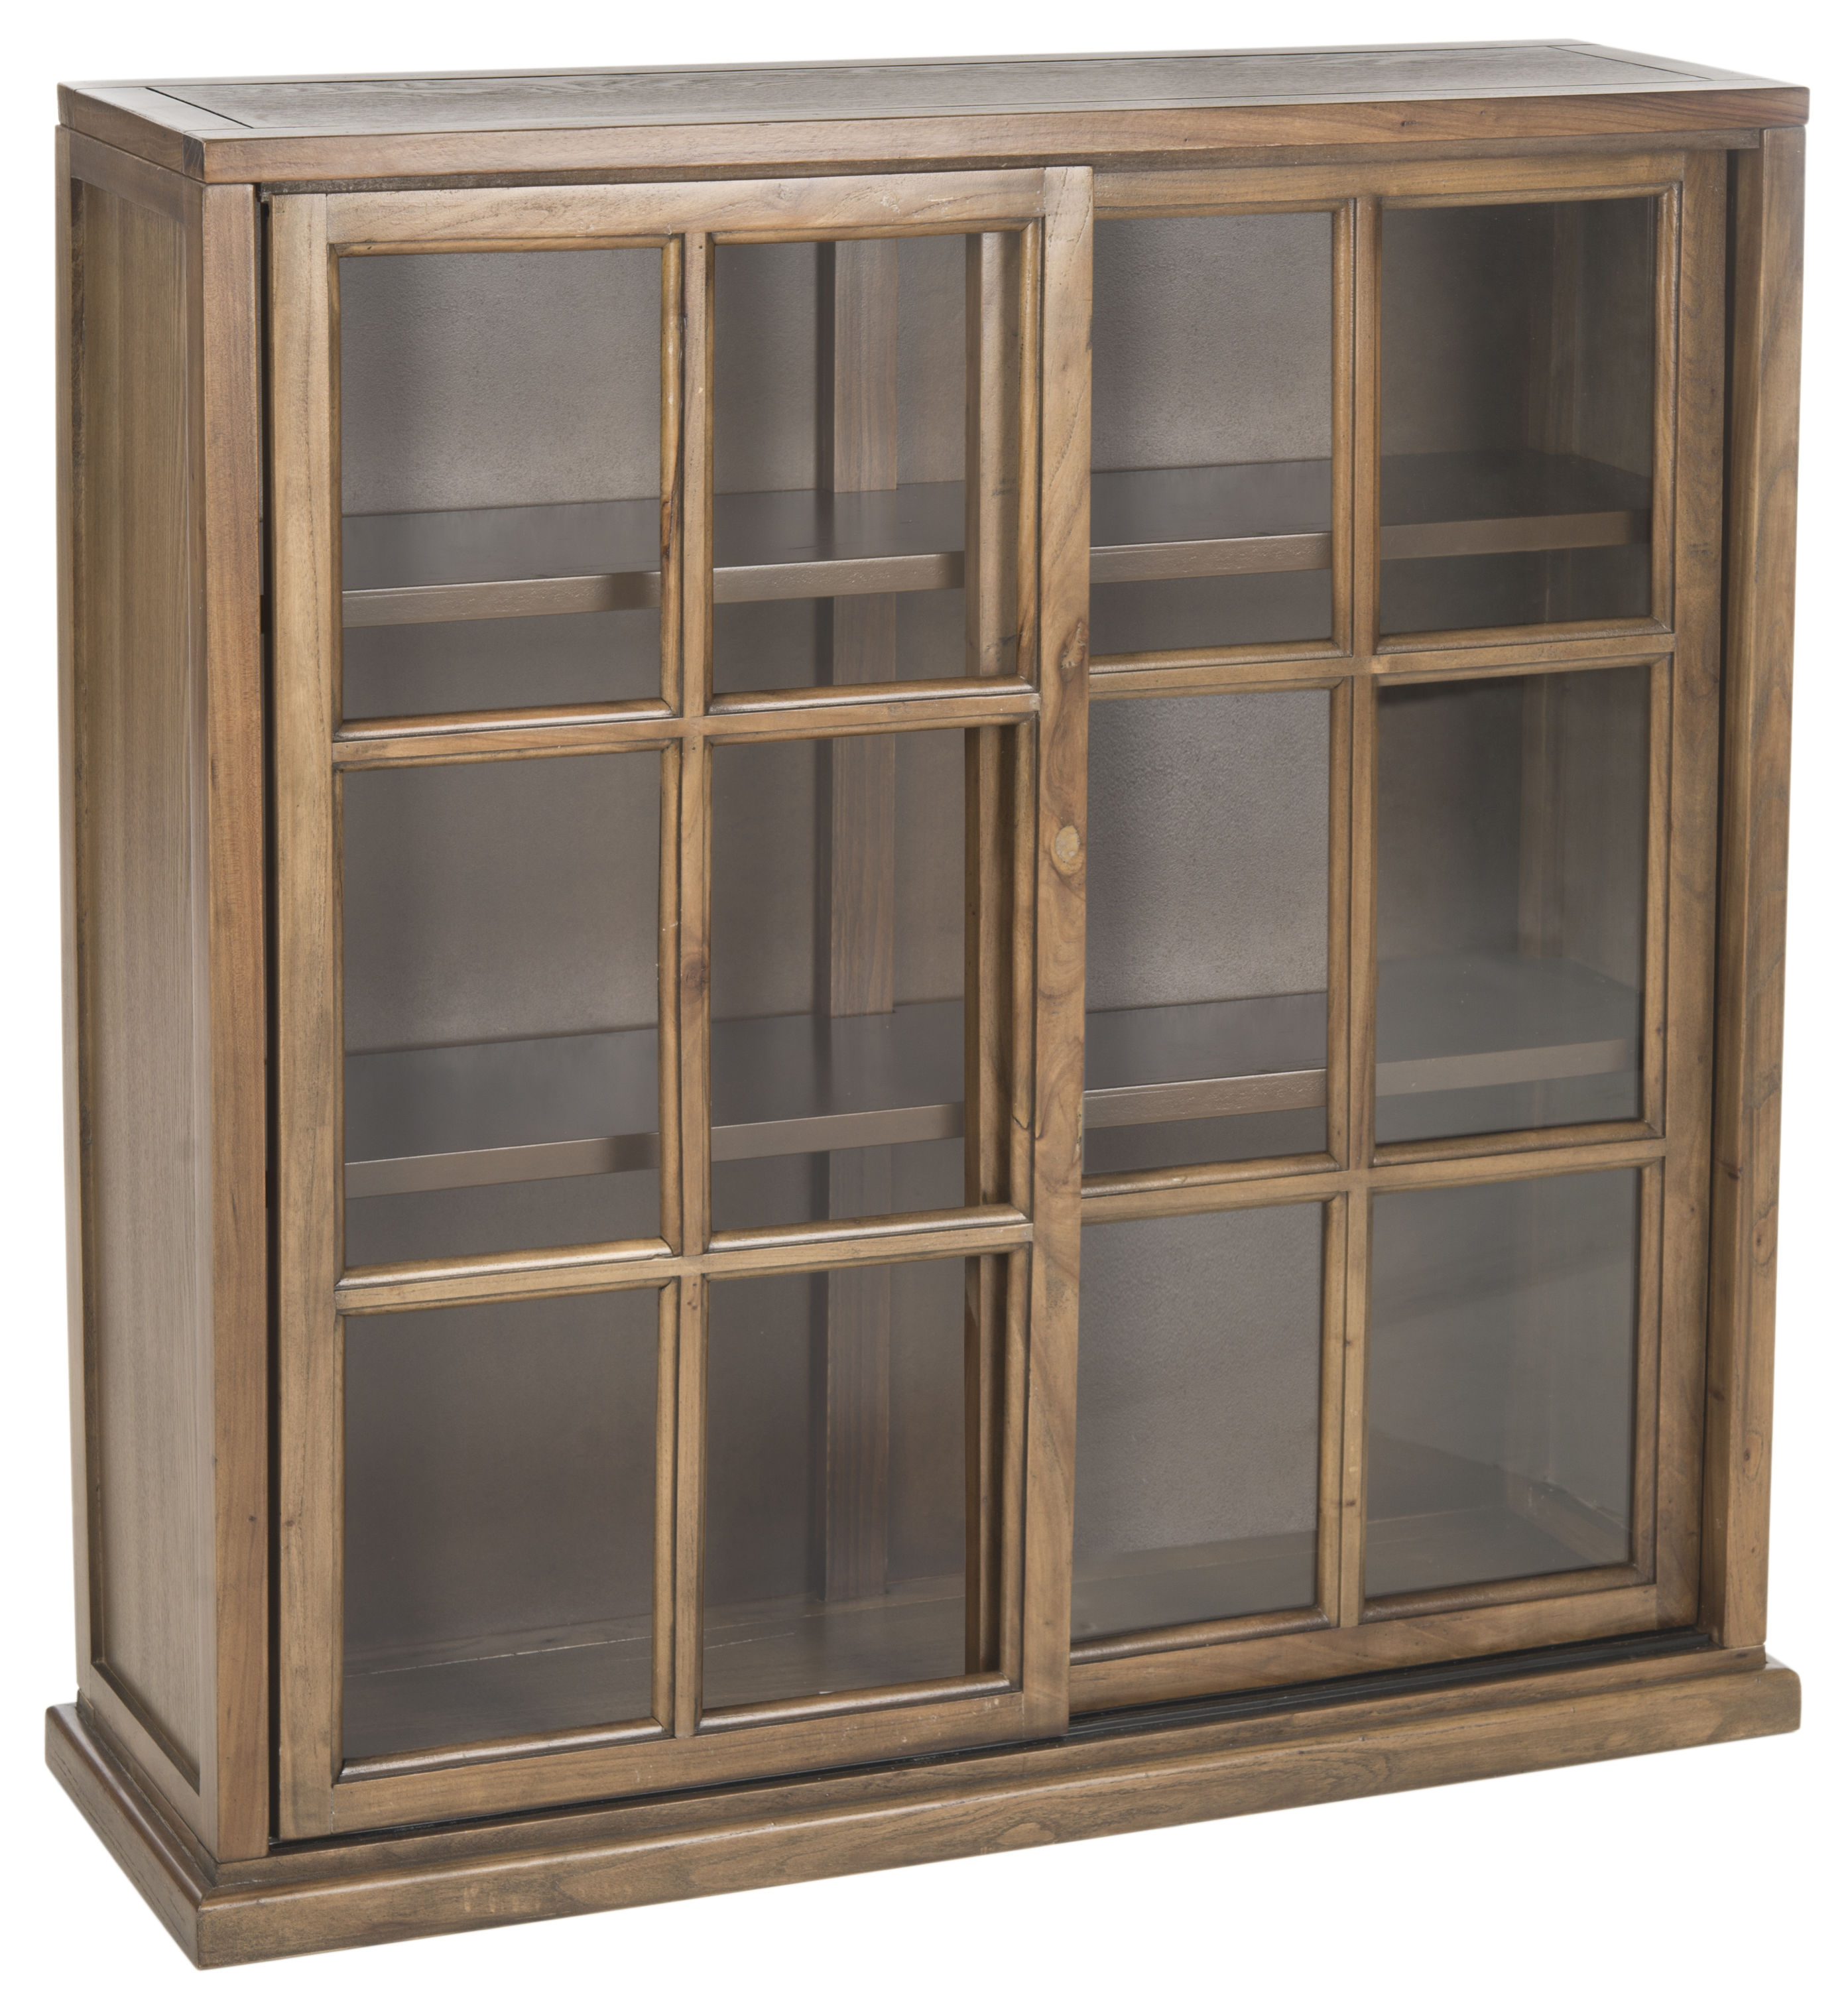 Details about   Elm Wood Brown 4 Shelves 2 Drawers Bookcase Display Cabinet cs6032 